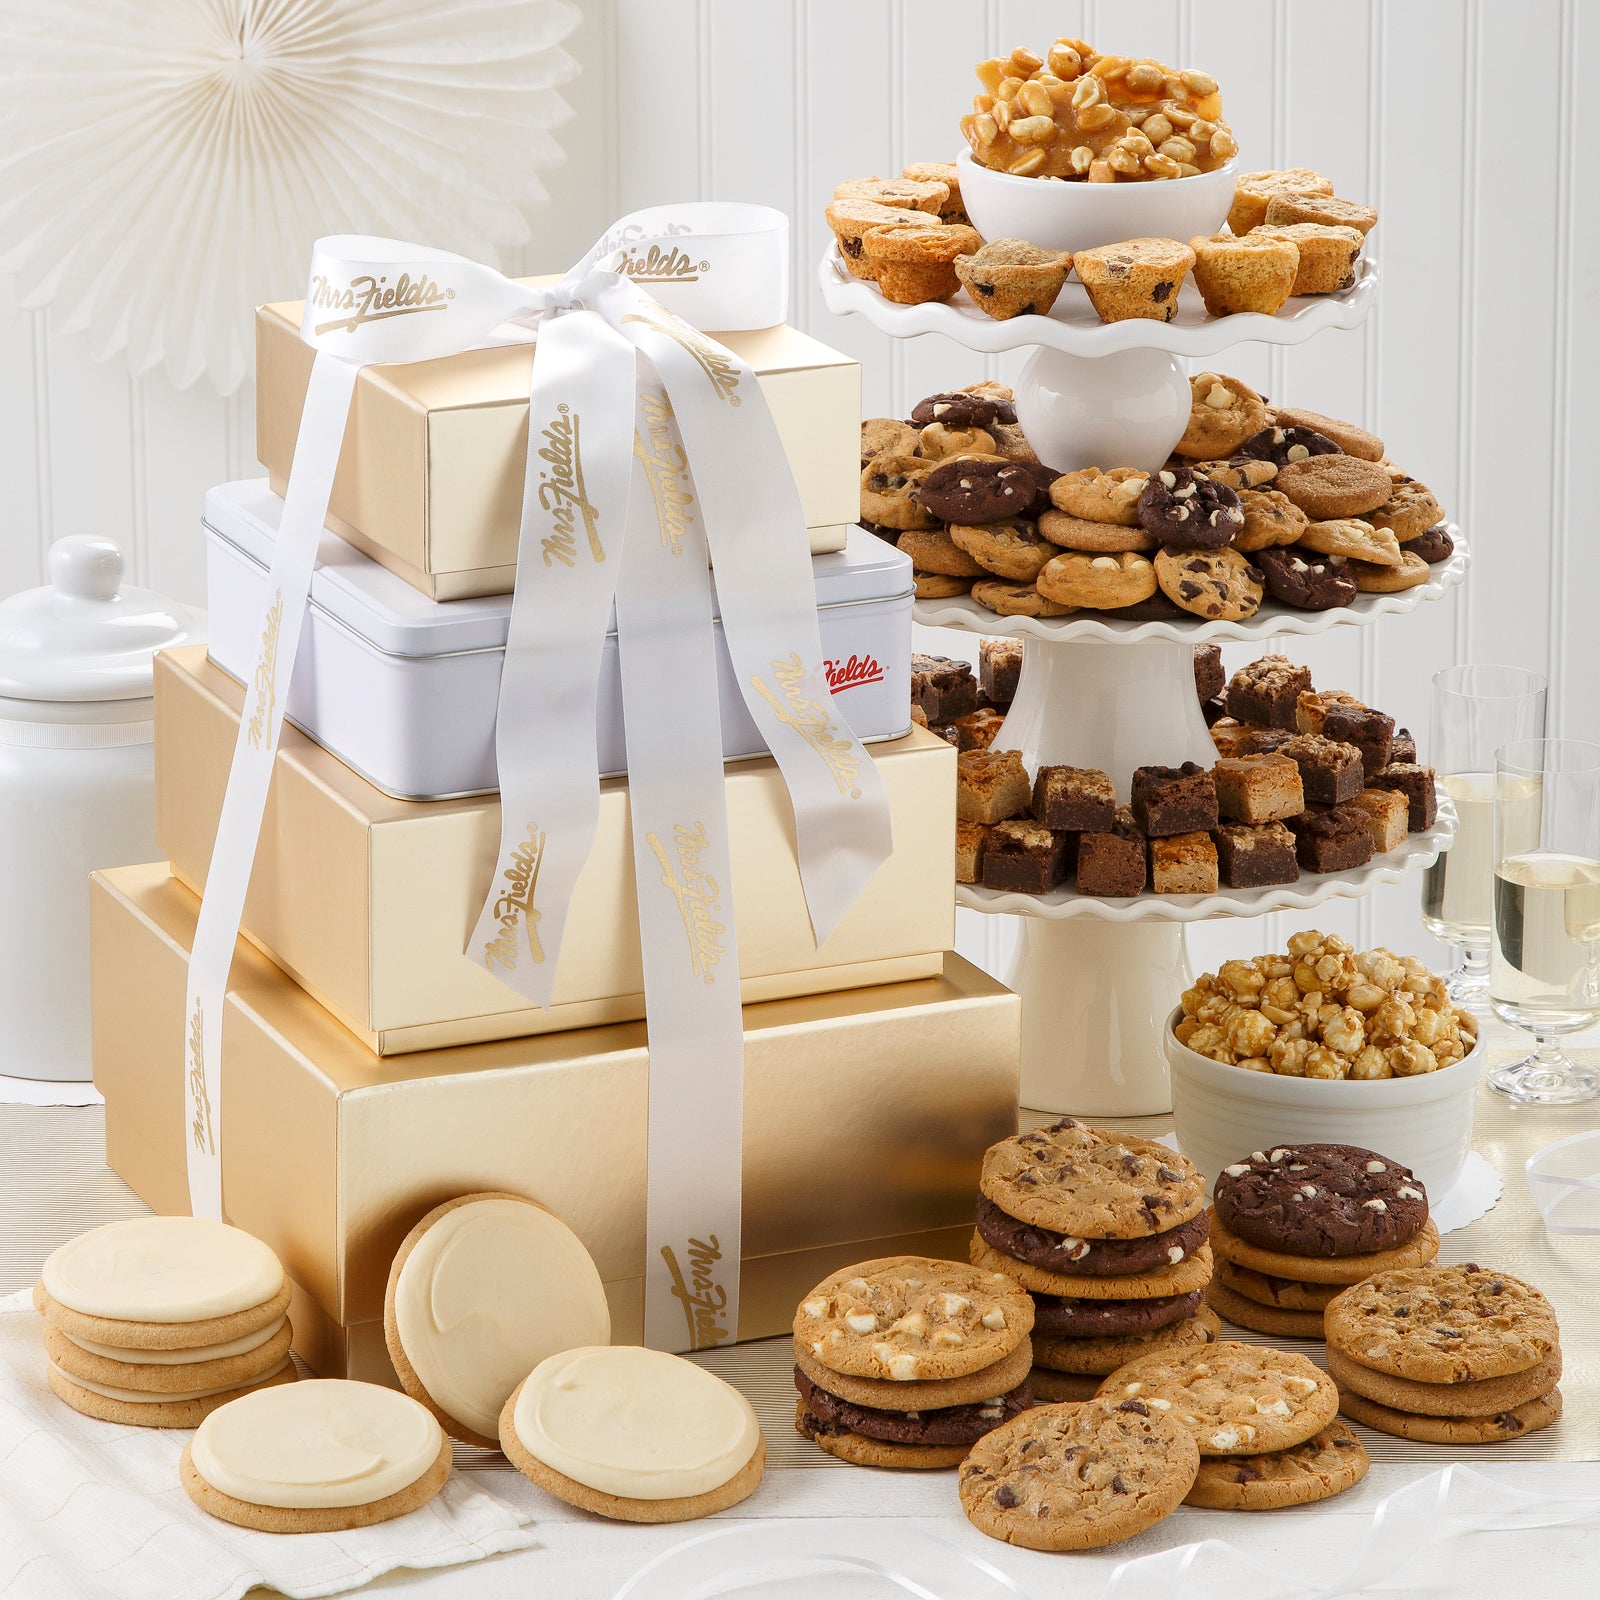 A four-tier gold and white tower tied with a white and gold Mrs. Fields ribbon and surrounded by an assortment of 75 Nibblers®, brownie bites, original cookies, muffins, 6 frosted cookies, peanut brittle, and popcorn.